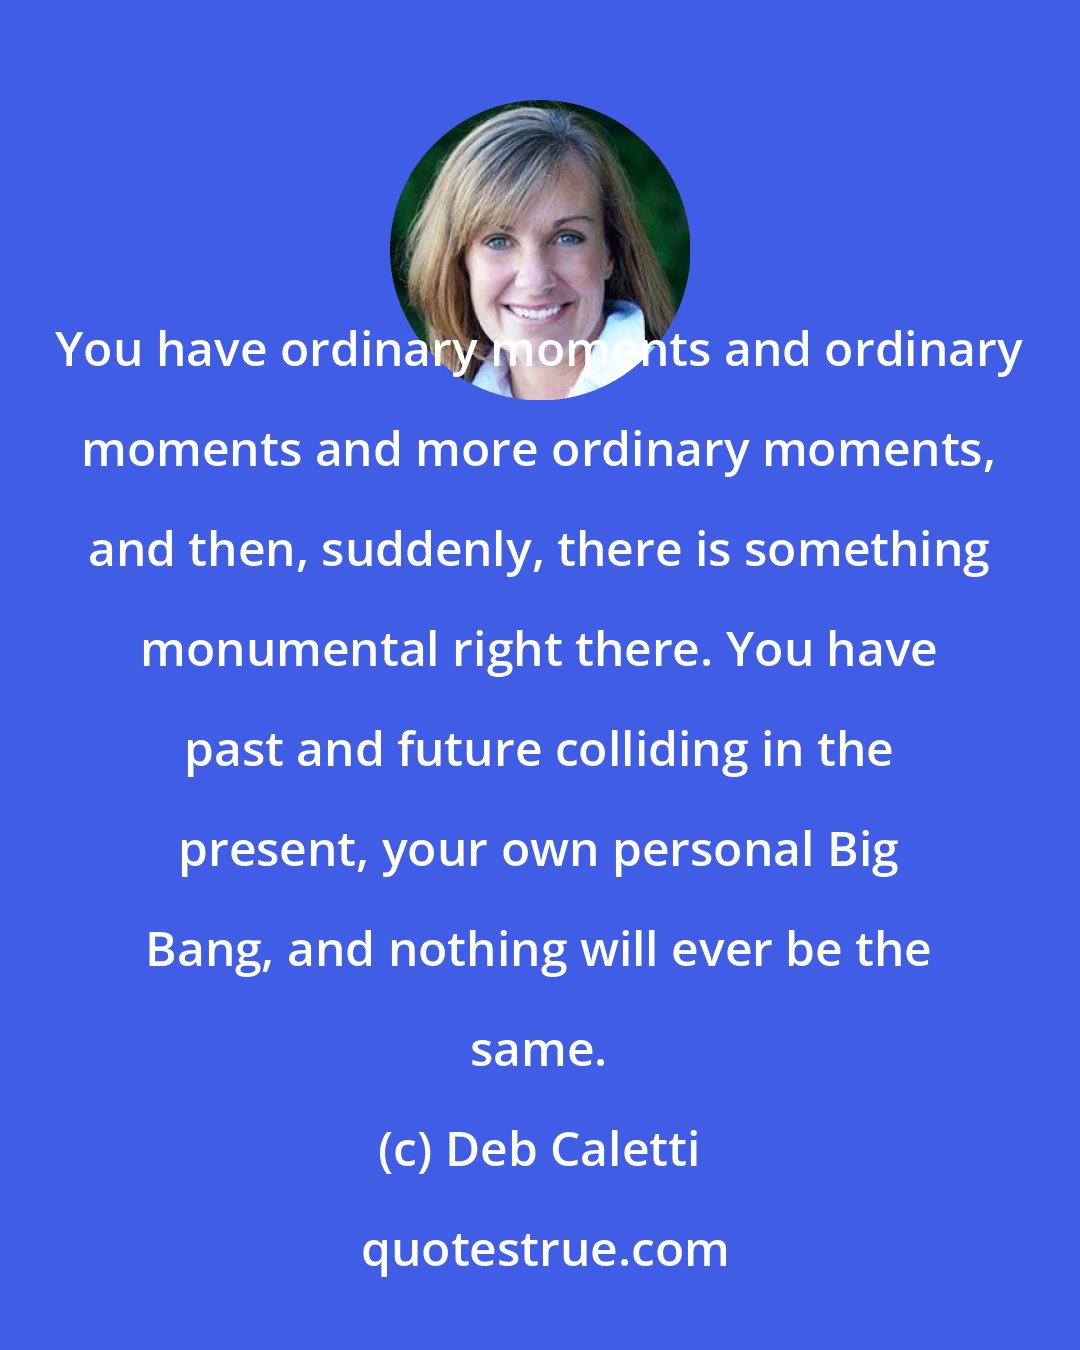 Deb Caletti: You have ordinary moments and ordinary moments and more ordinary moments, and then, suddenly, there is something monumental right there. You have past and future colliding in the present, your own personal Big Bang, and nothing will ever be the same.